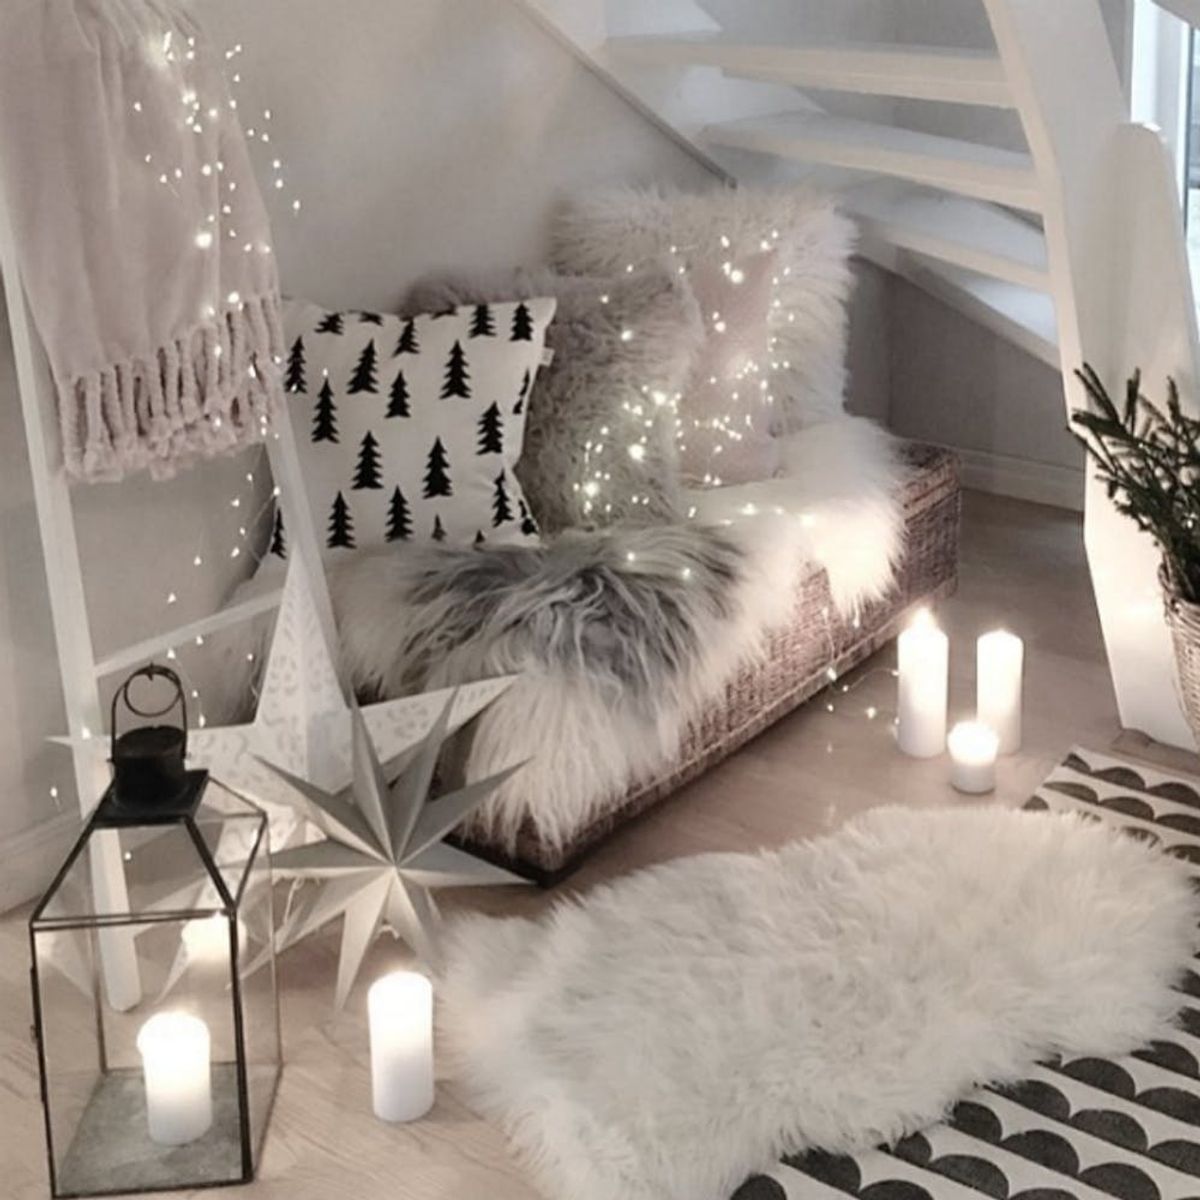 Fairy Magic Decor Is Here to Keep You Cozy This Winter